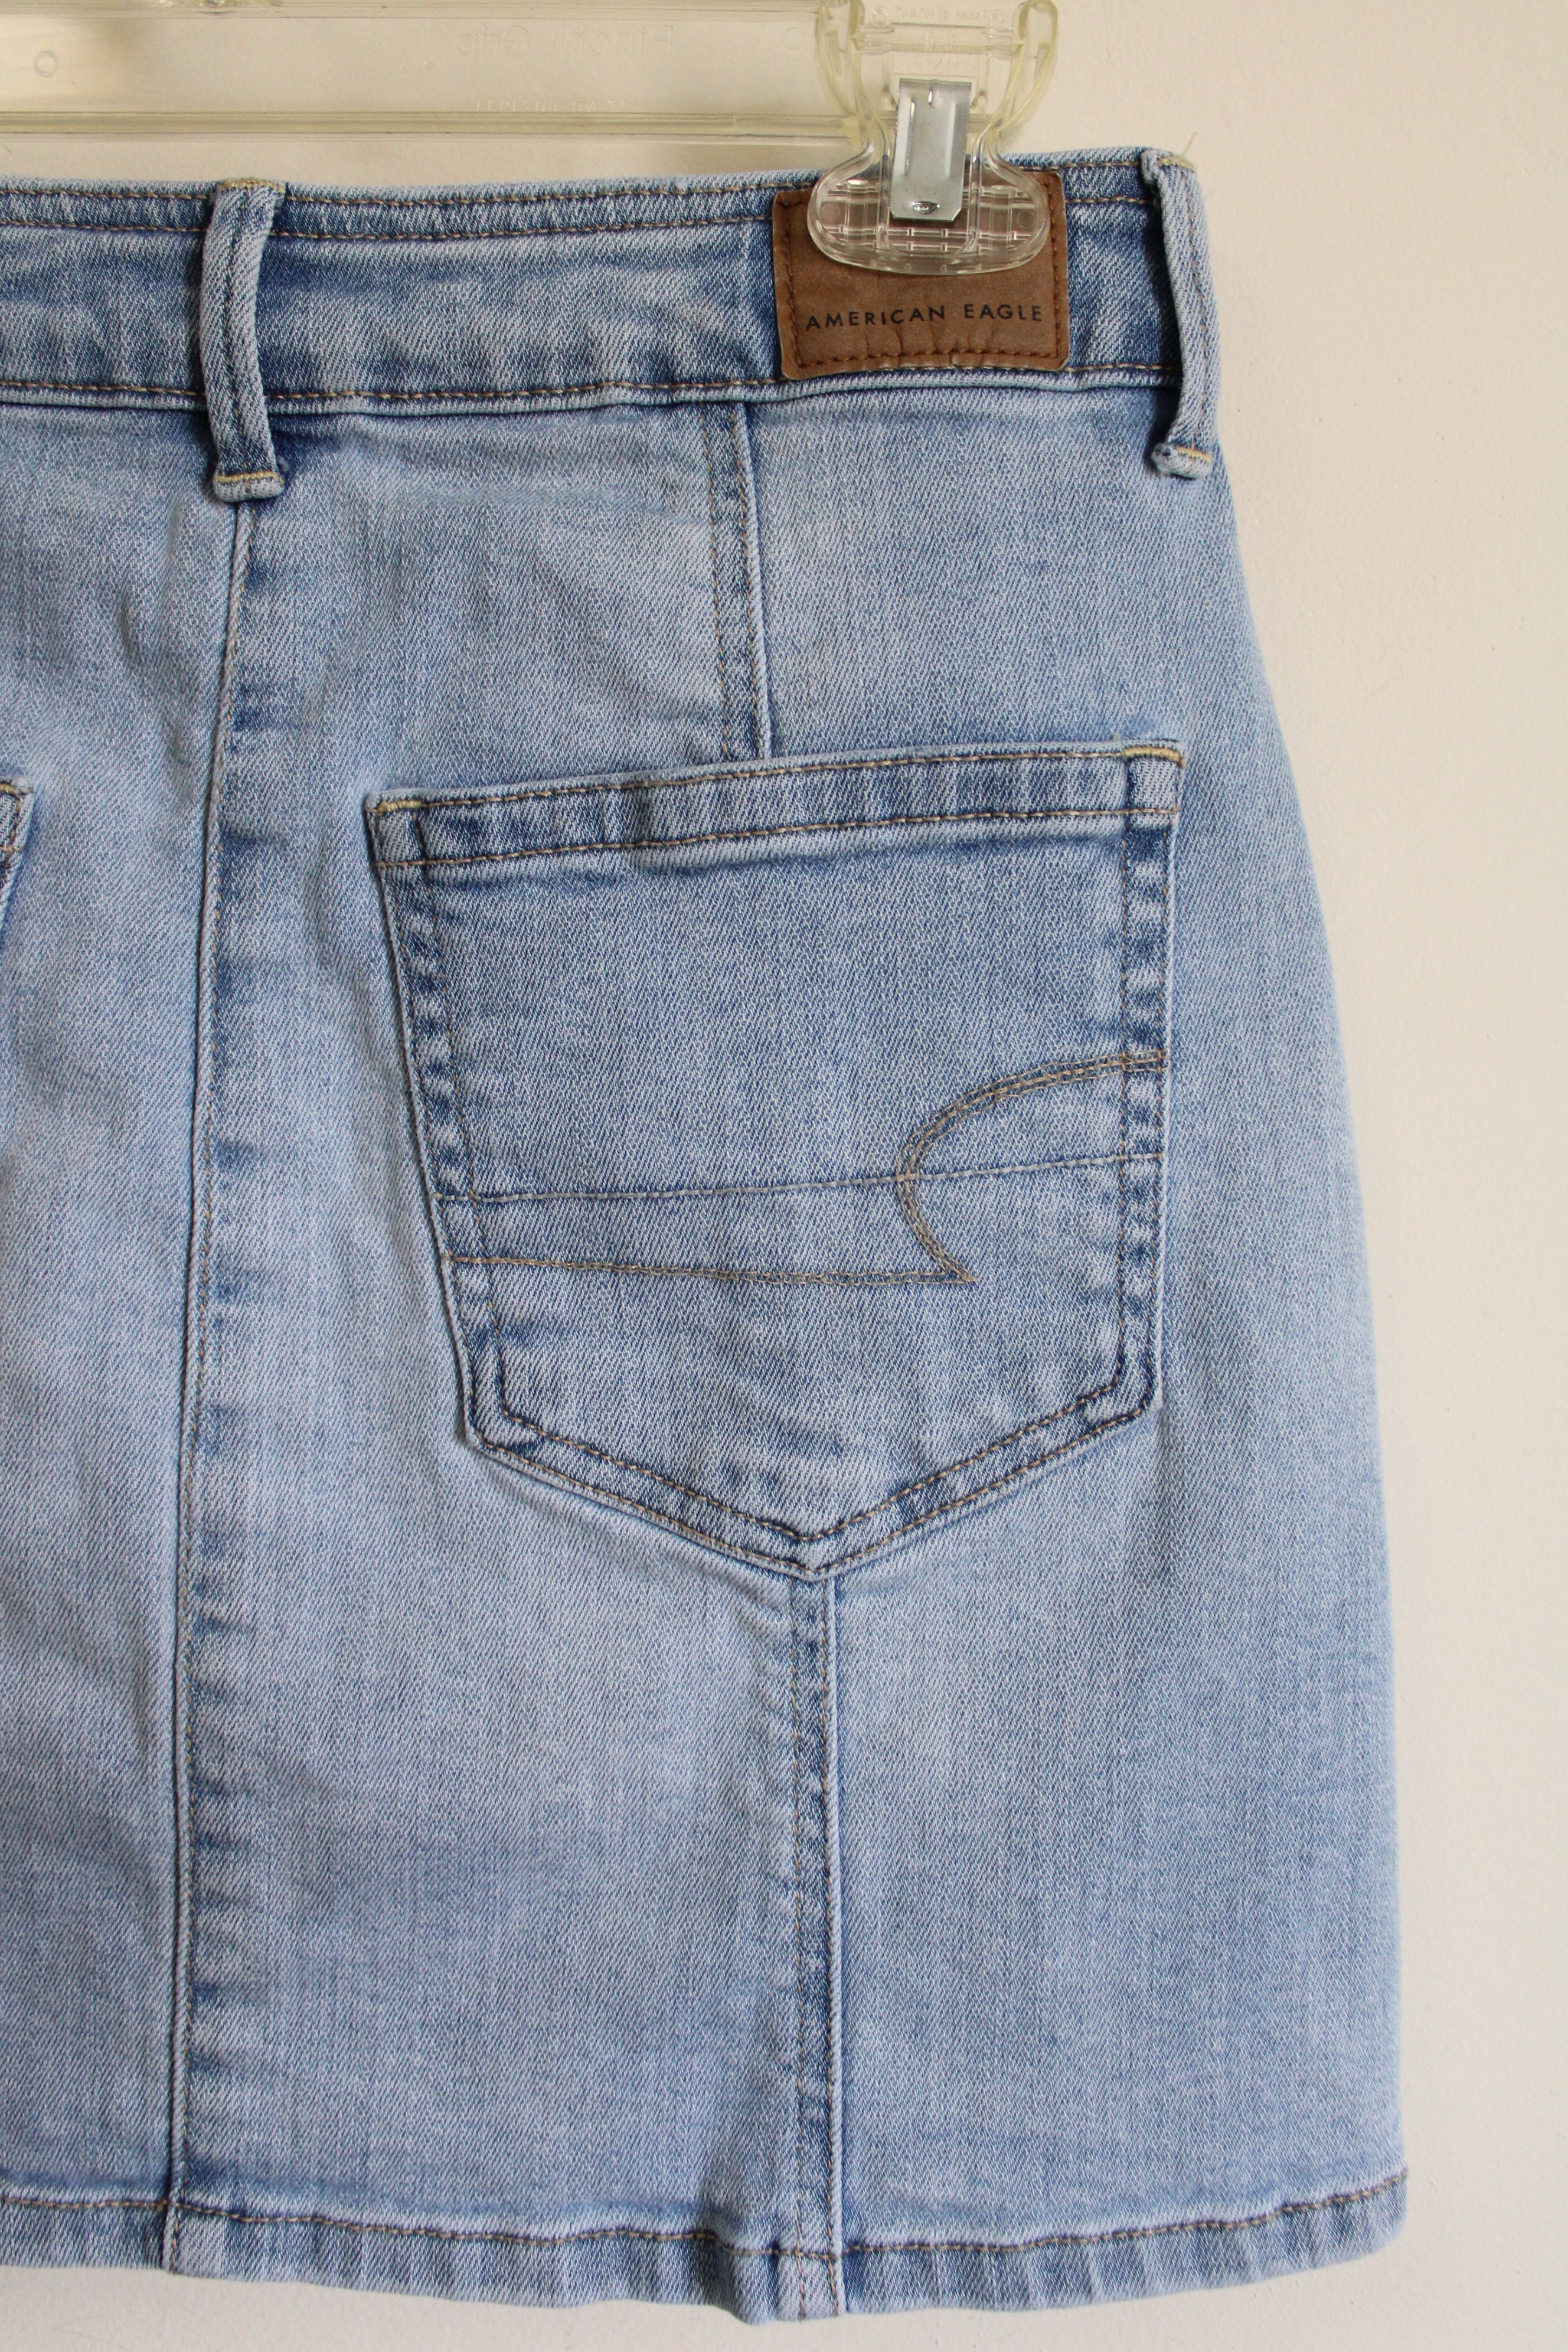 American Eagle Outfitters 100% Cotton Solid Blue Denim Skirt Size 2 - 54%  off | ThredUp